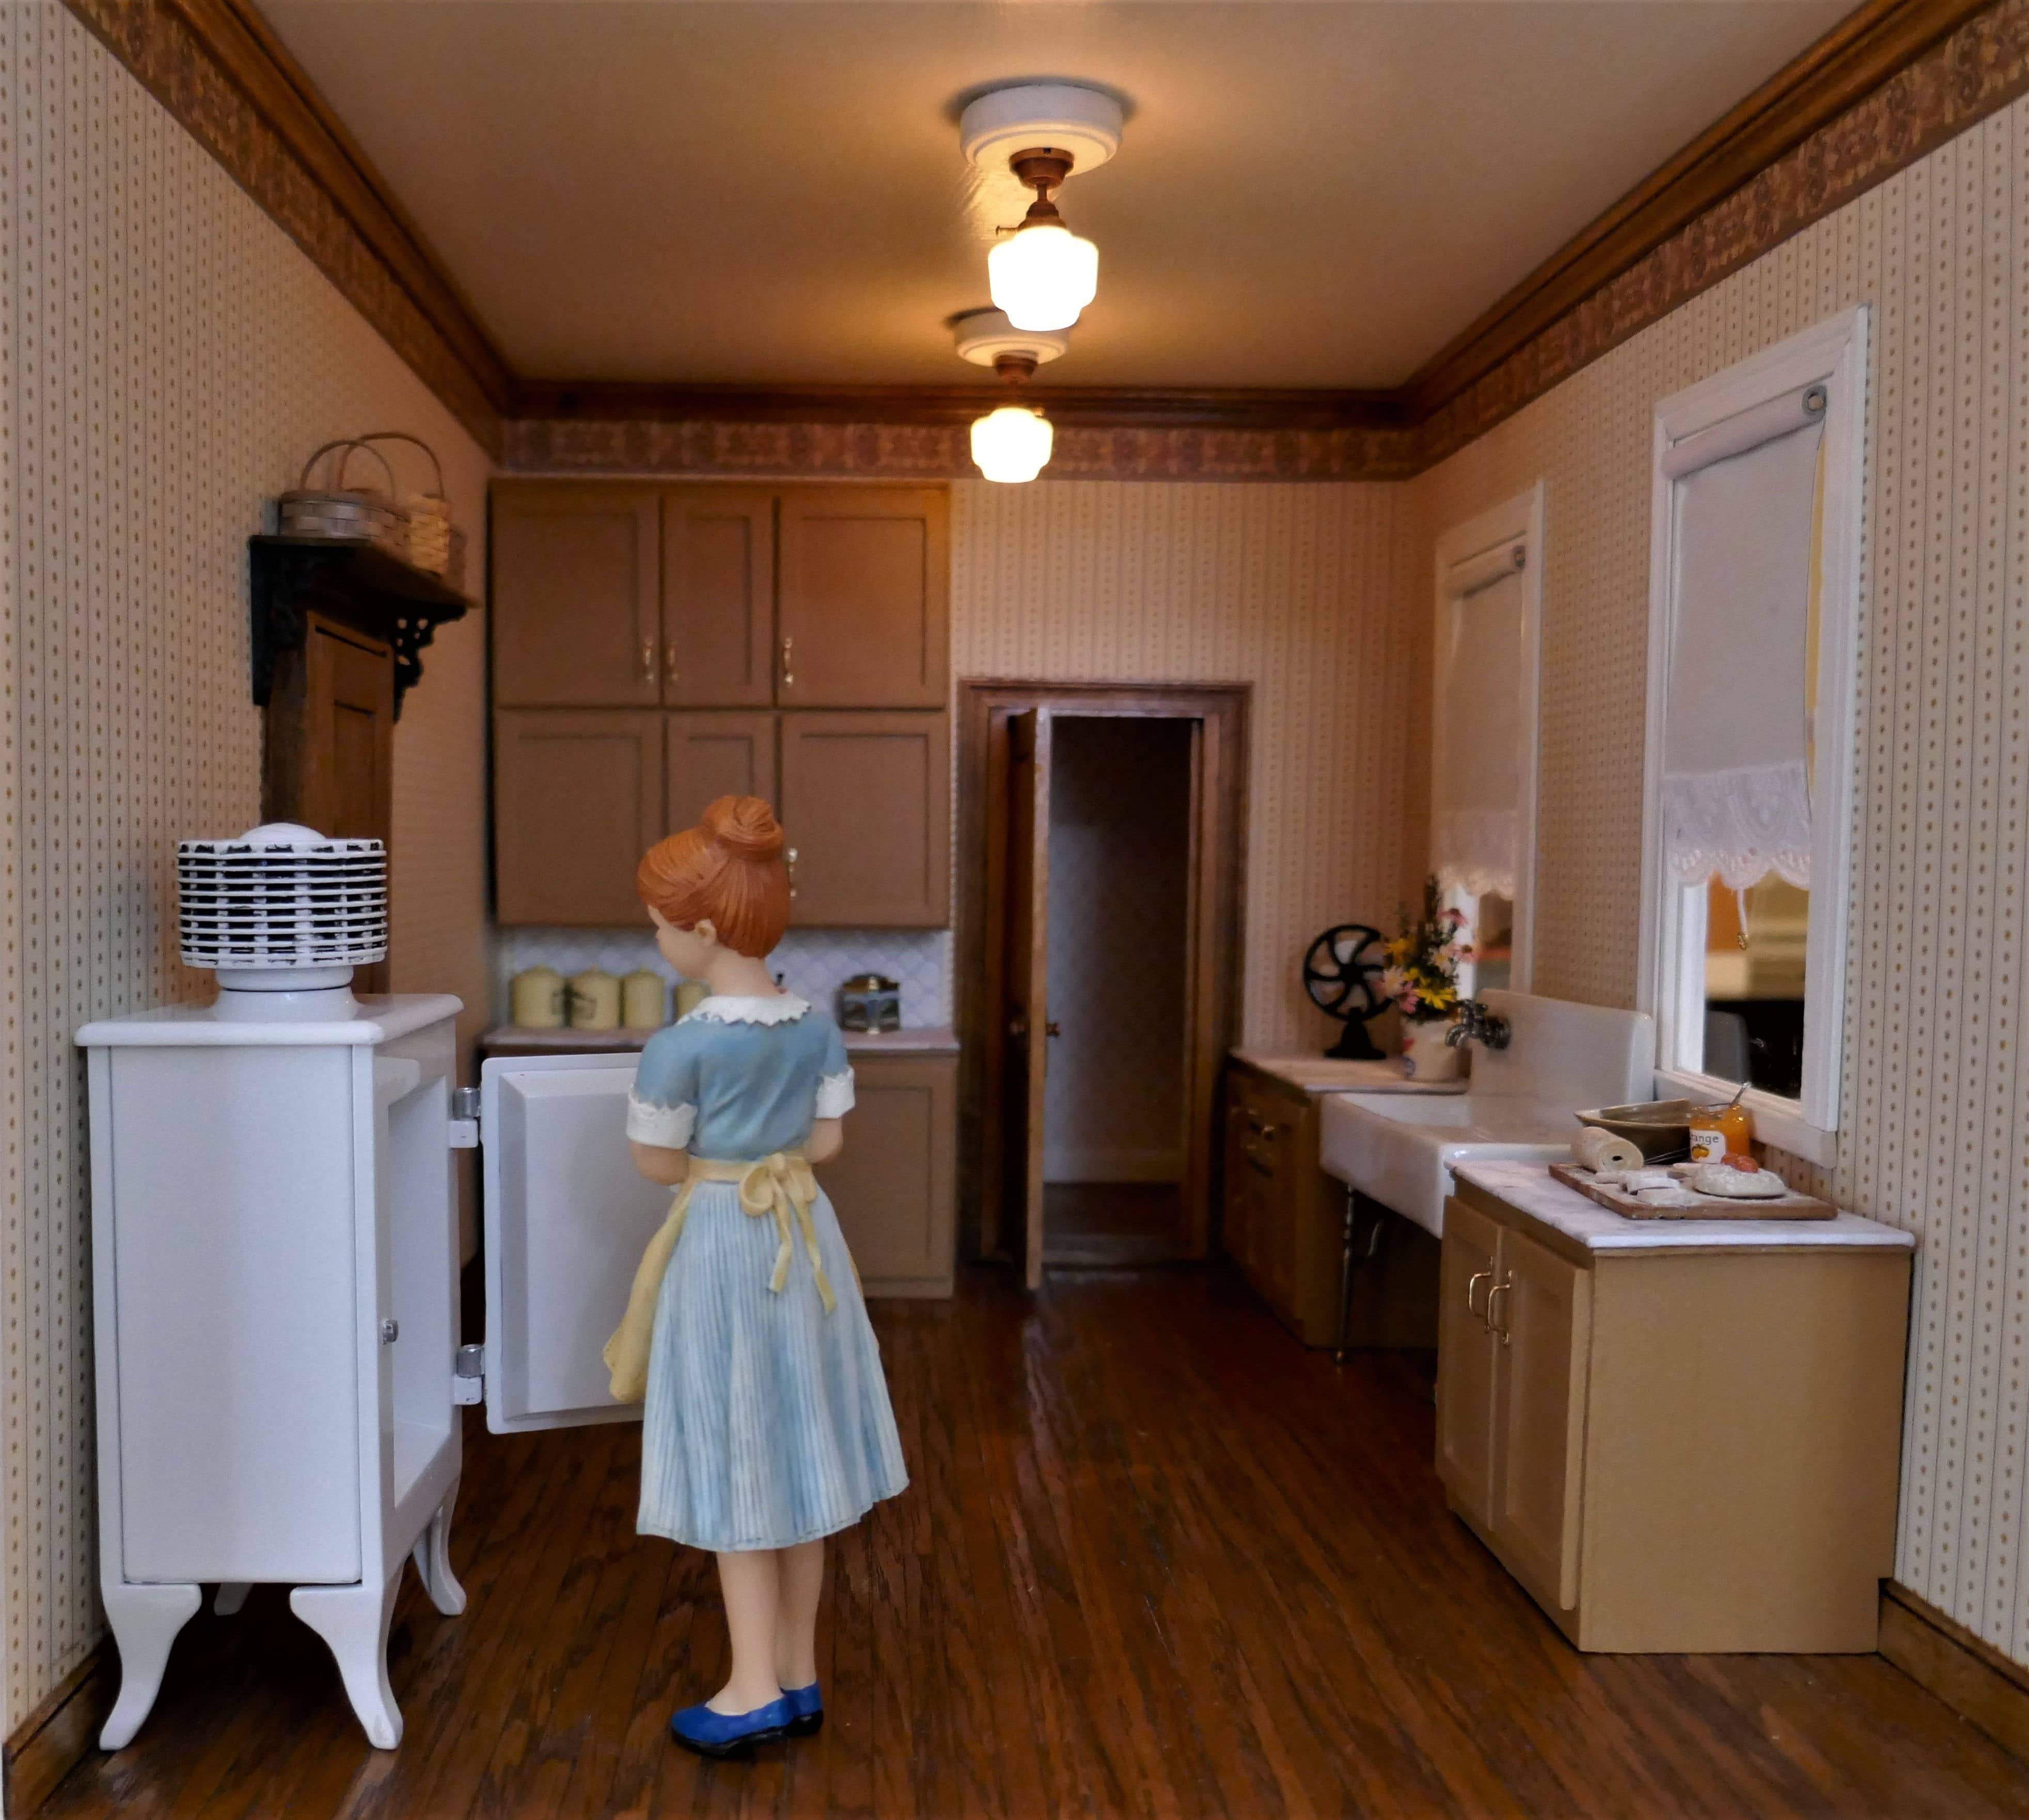 Kitchen with the lady of the house